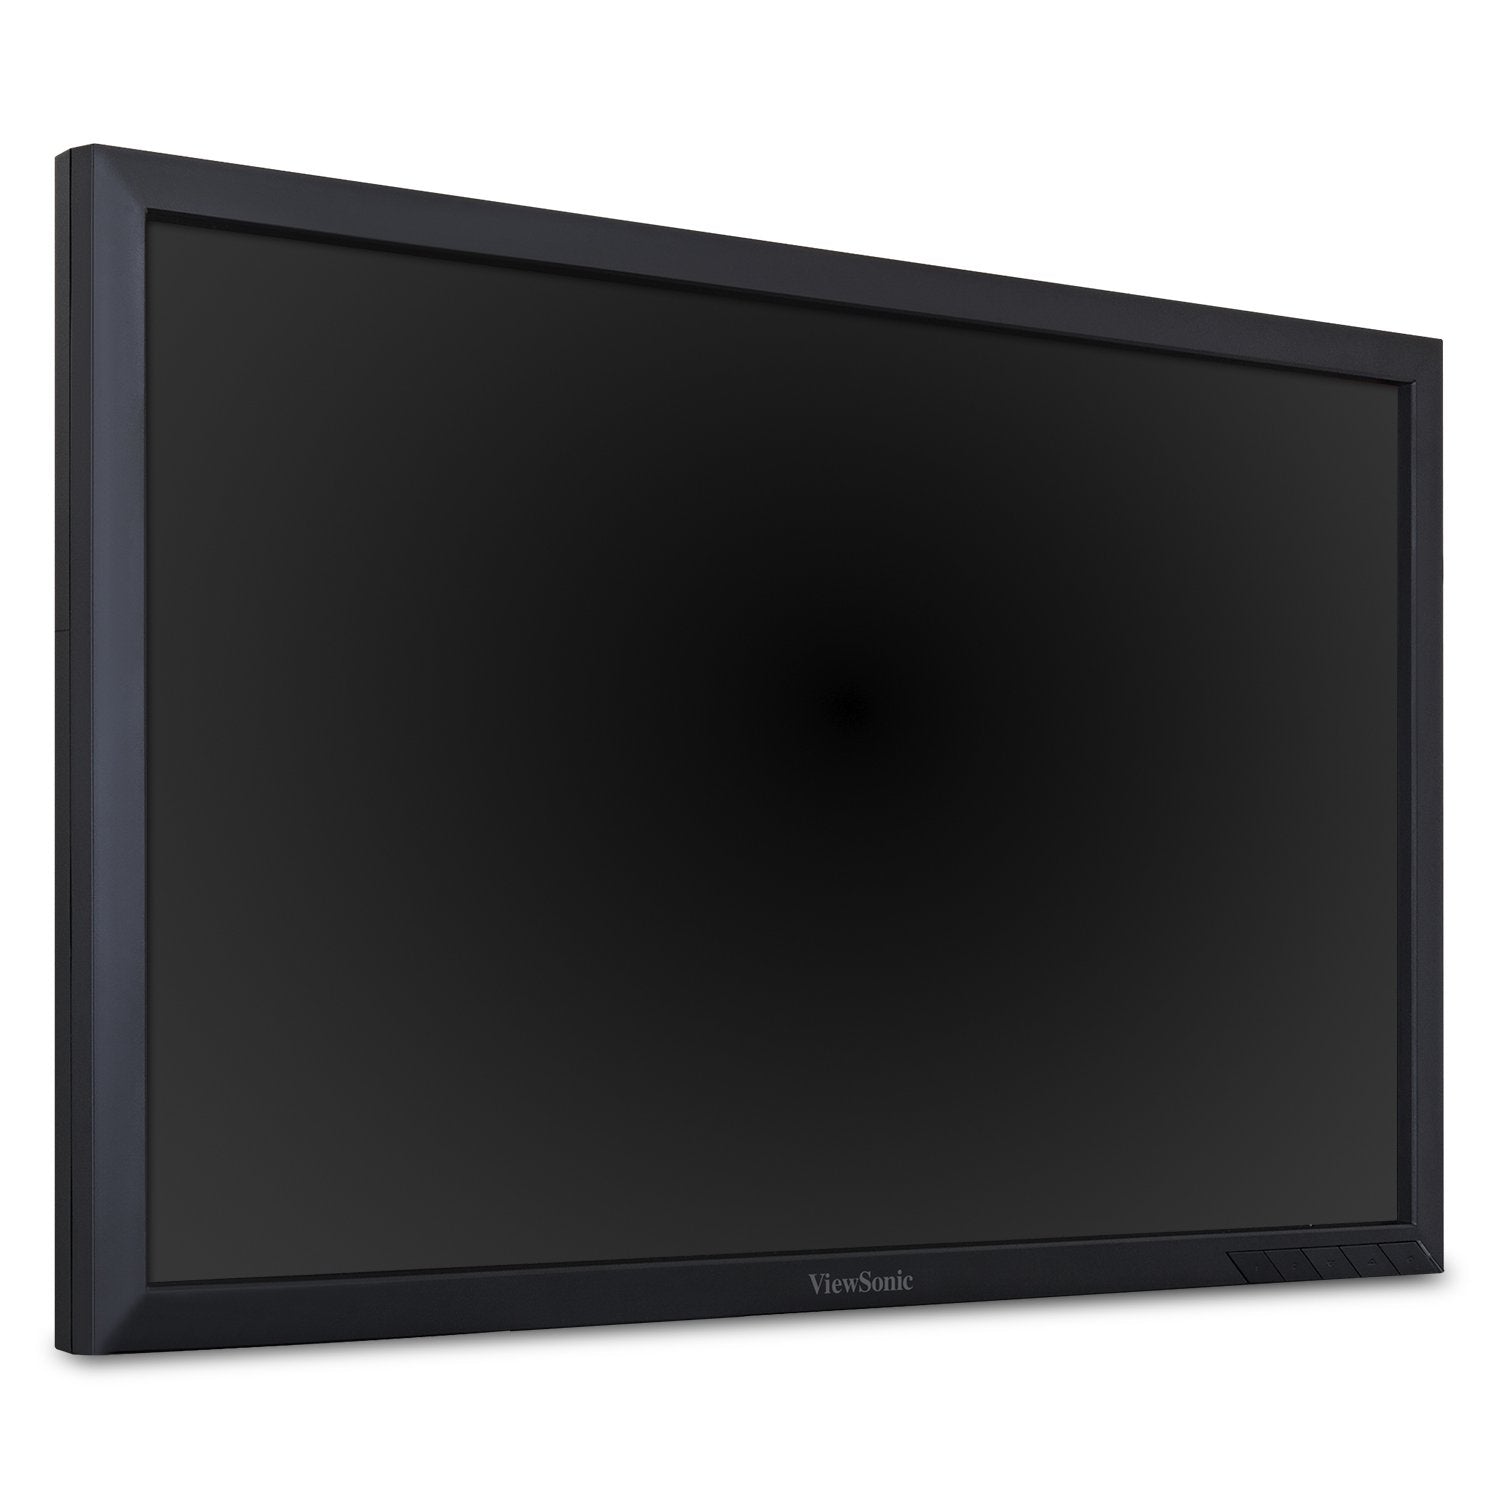 ViewSonic VG2249_H2-R 22" SuperClear LCD Monitor 2-Pack Without Stands - C Grade Refurbished